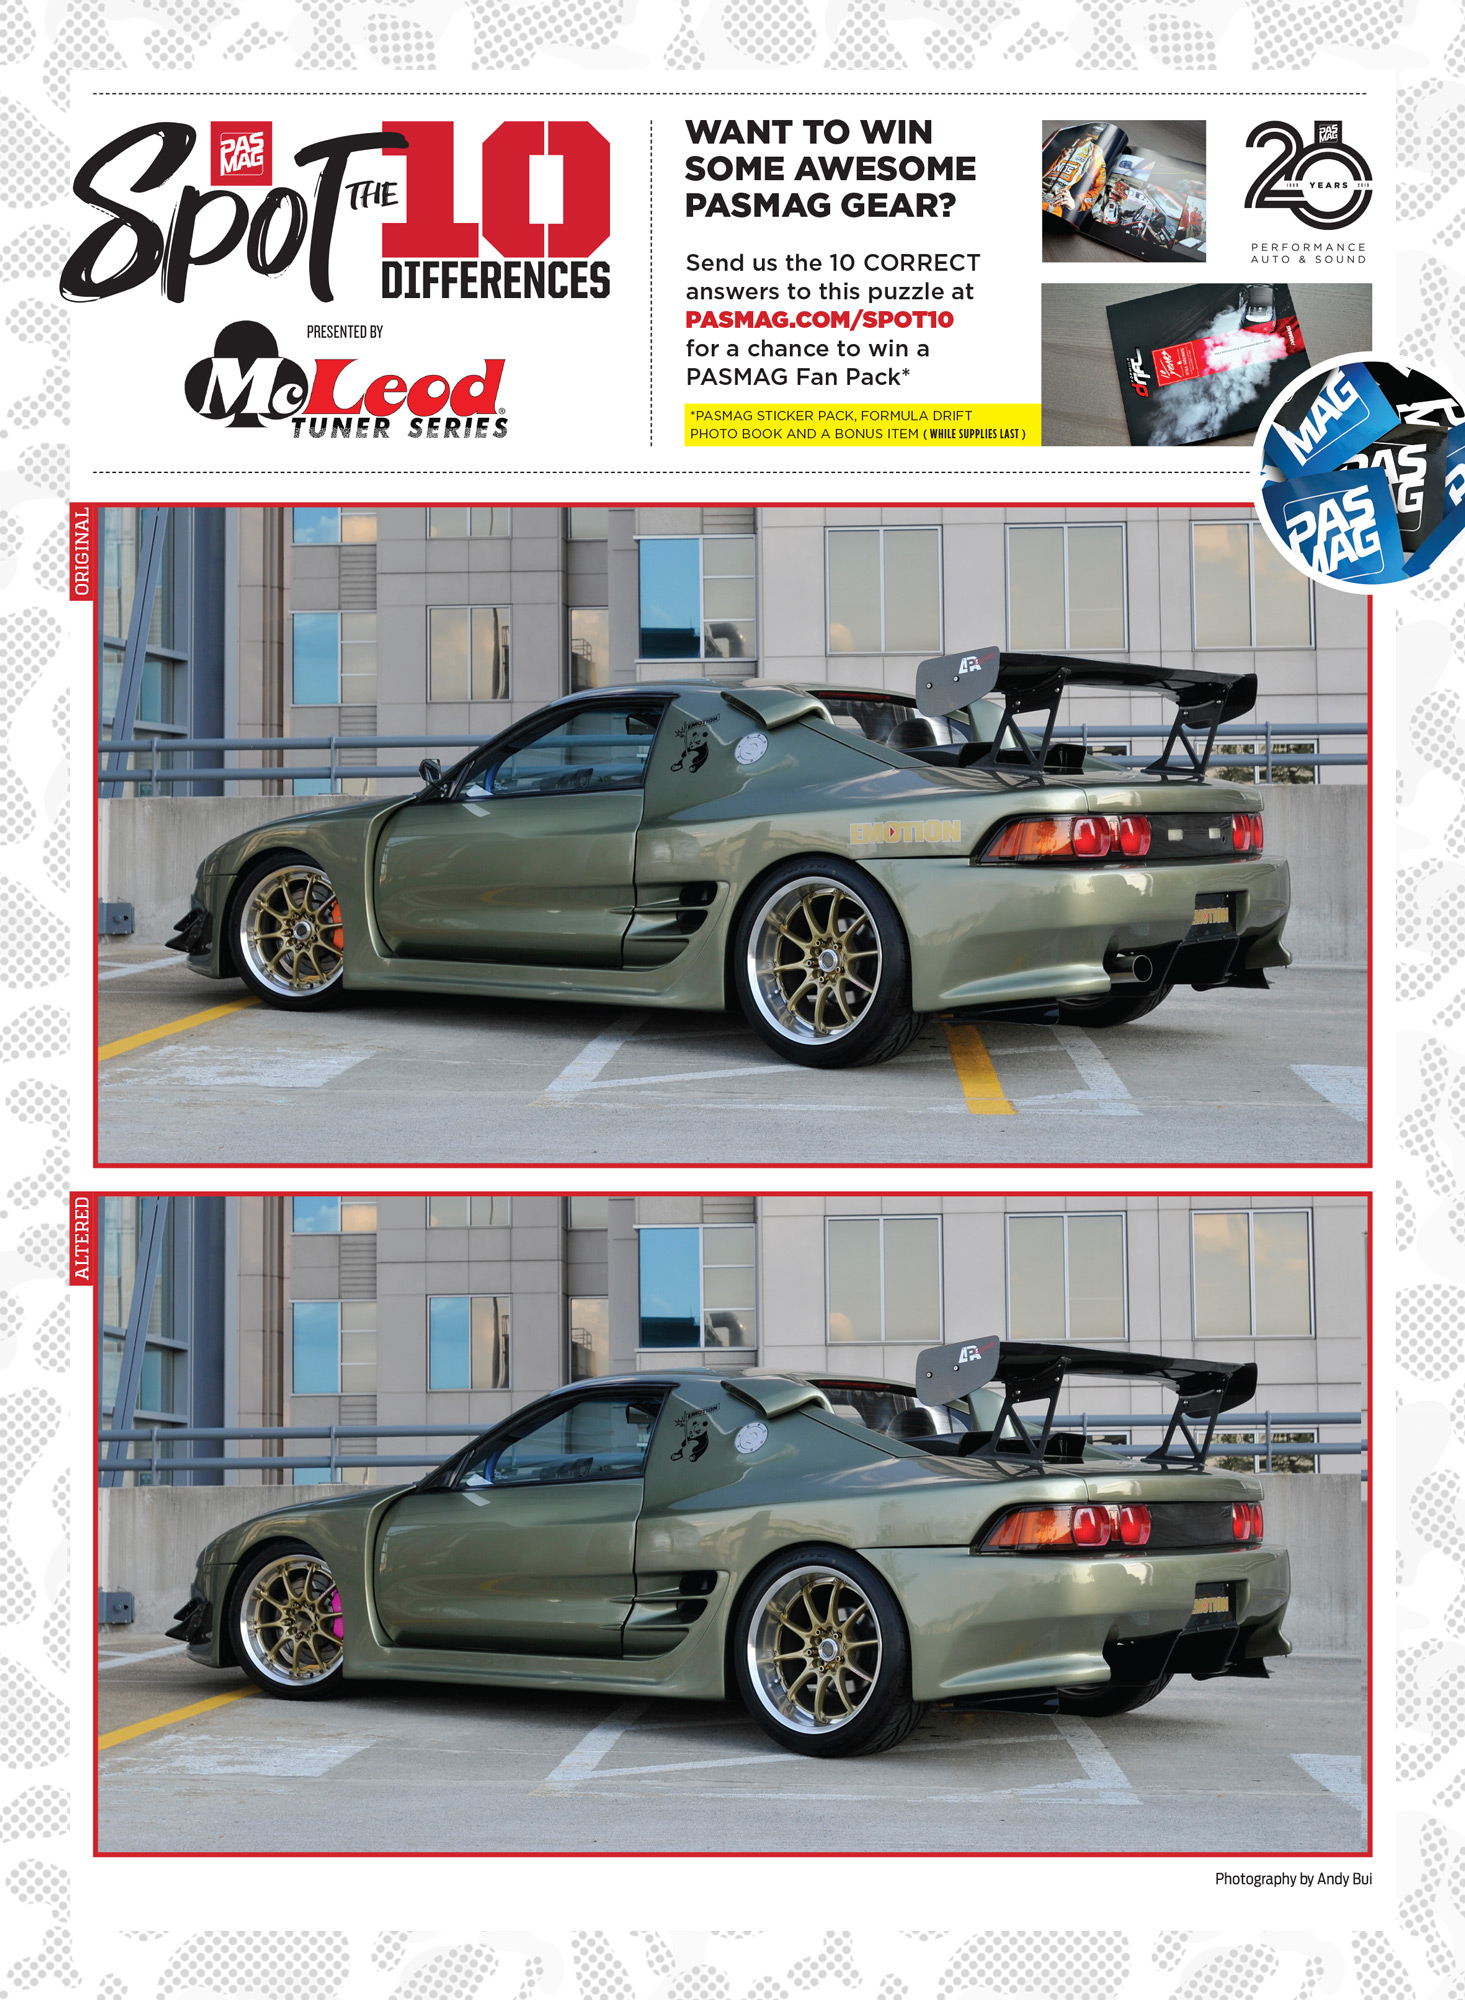 PASMAG Spot the Differences May 19 2020 Afrim Zeka 1991 Toyota MR2 pasmag